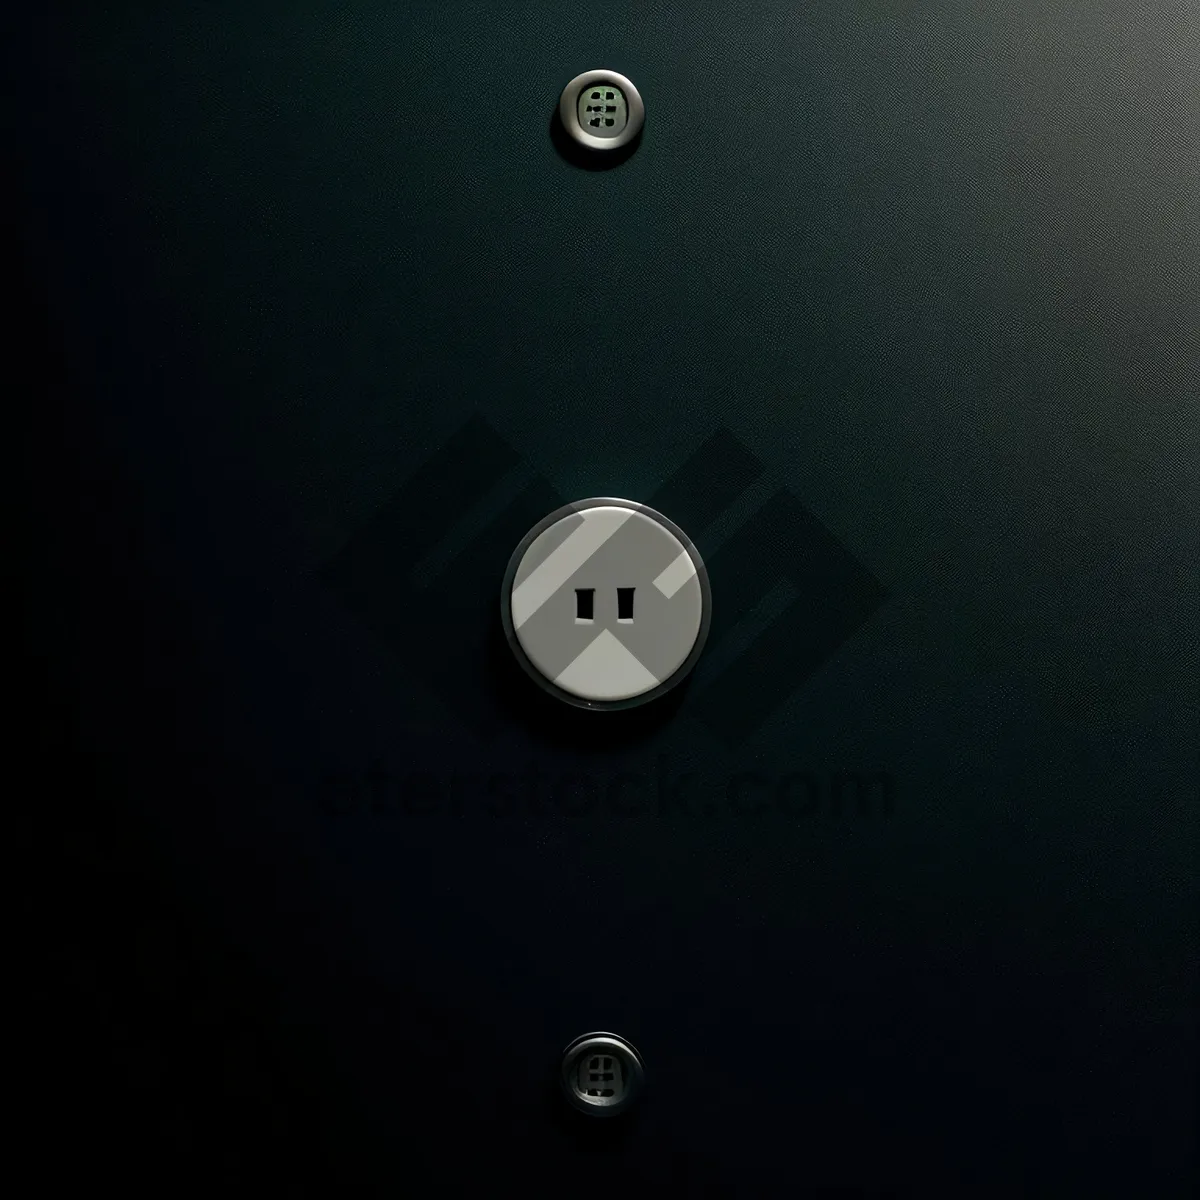 Picture of Shiny device button on light background